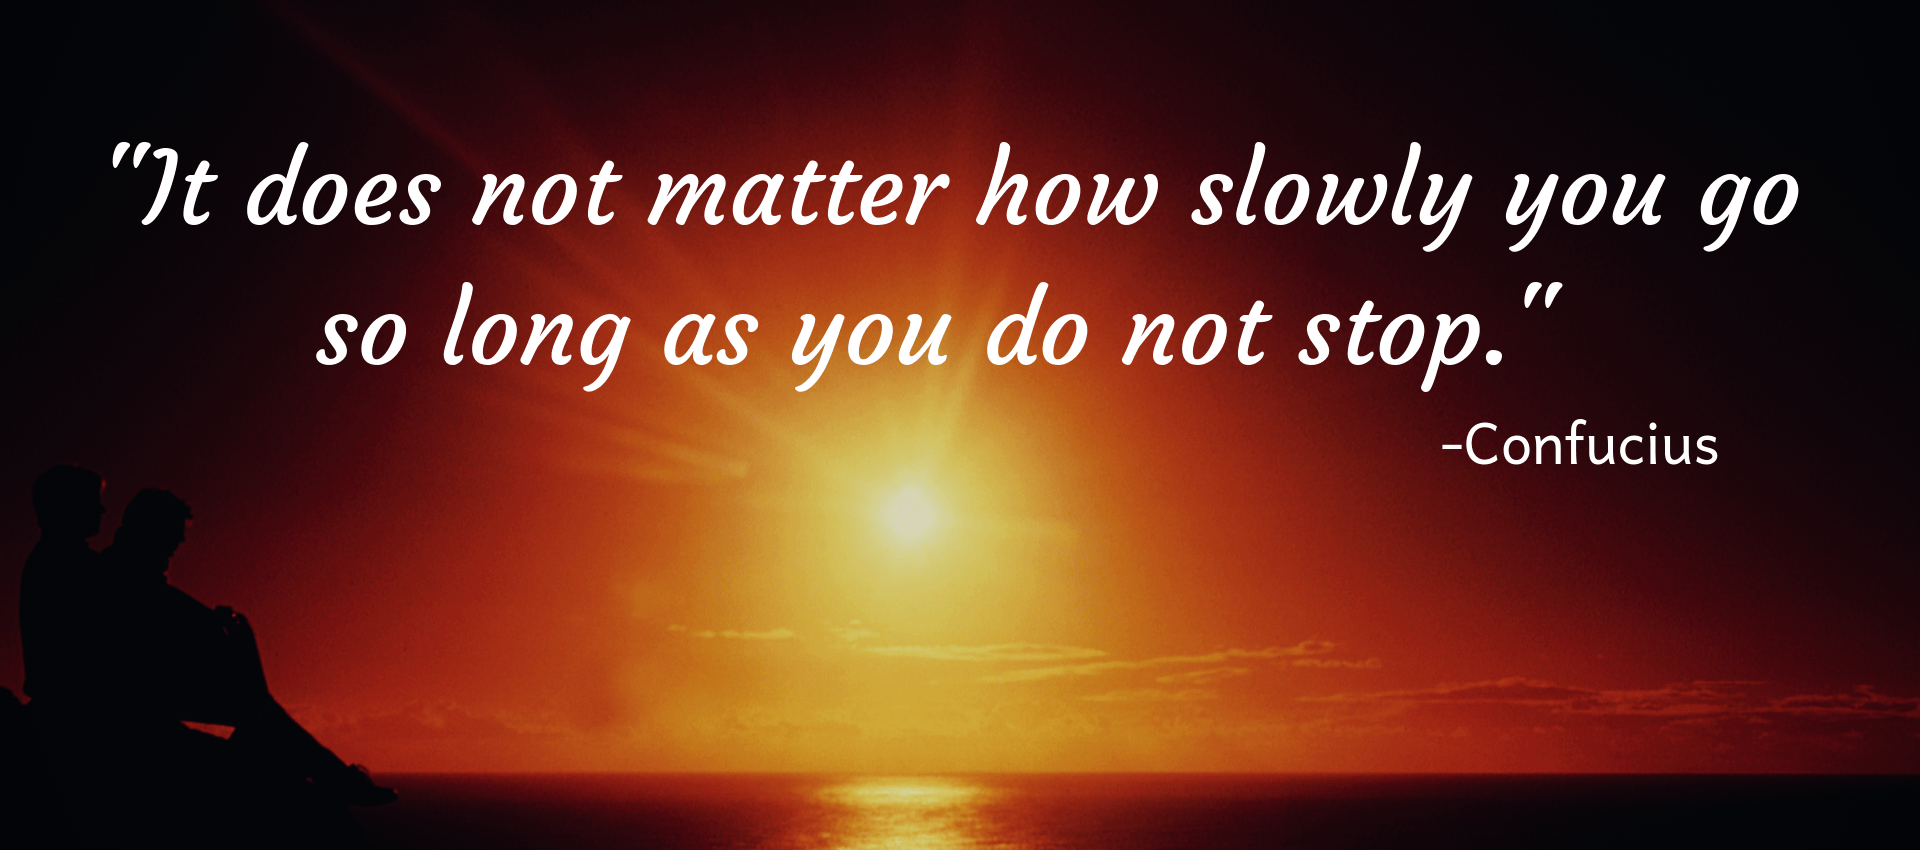 Famous Quote It Does Not Matter How Slowly You Go So Long As You Do Not Stop Poly Languages